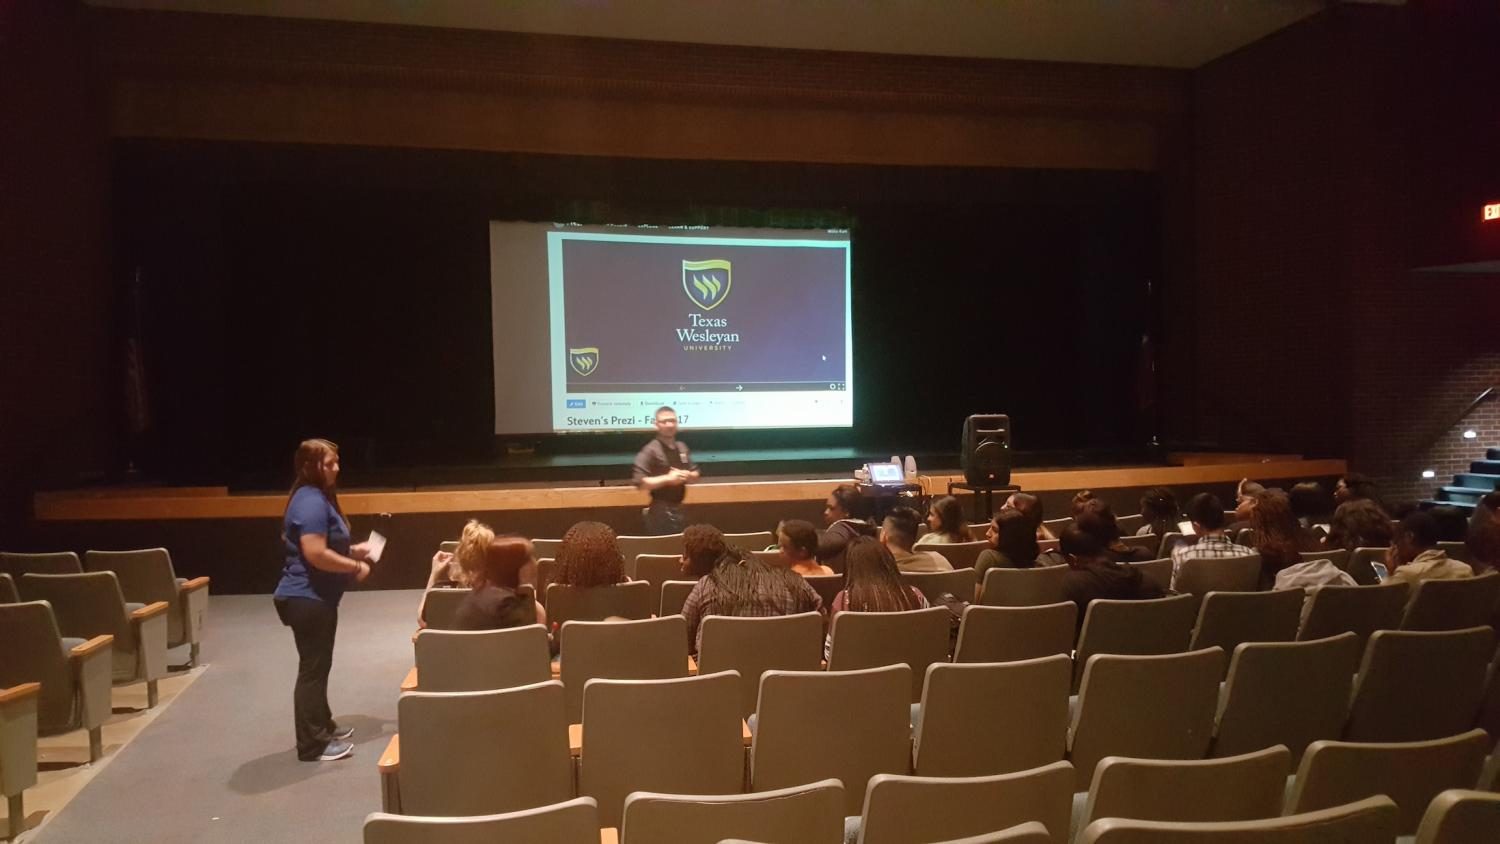 On May 10, A guest speaker was giving out information to AVID students about Texas Wesleyan University.